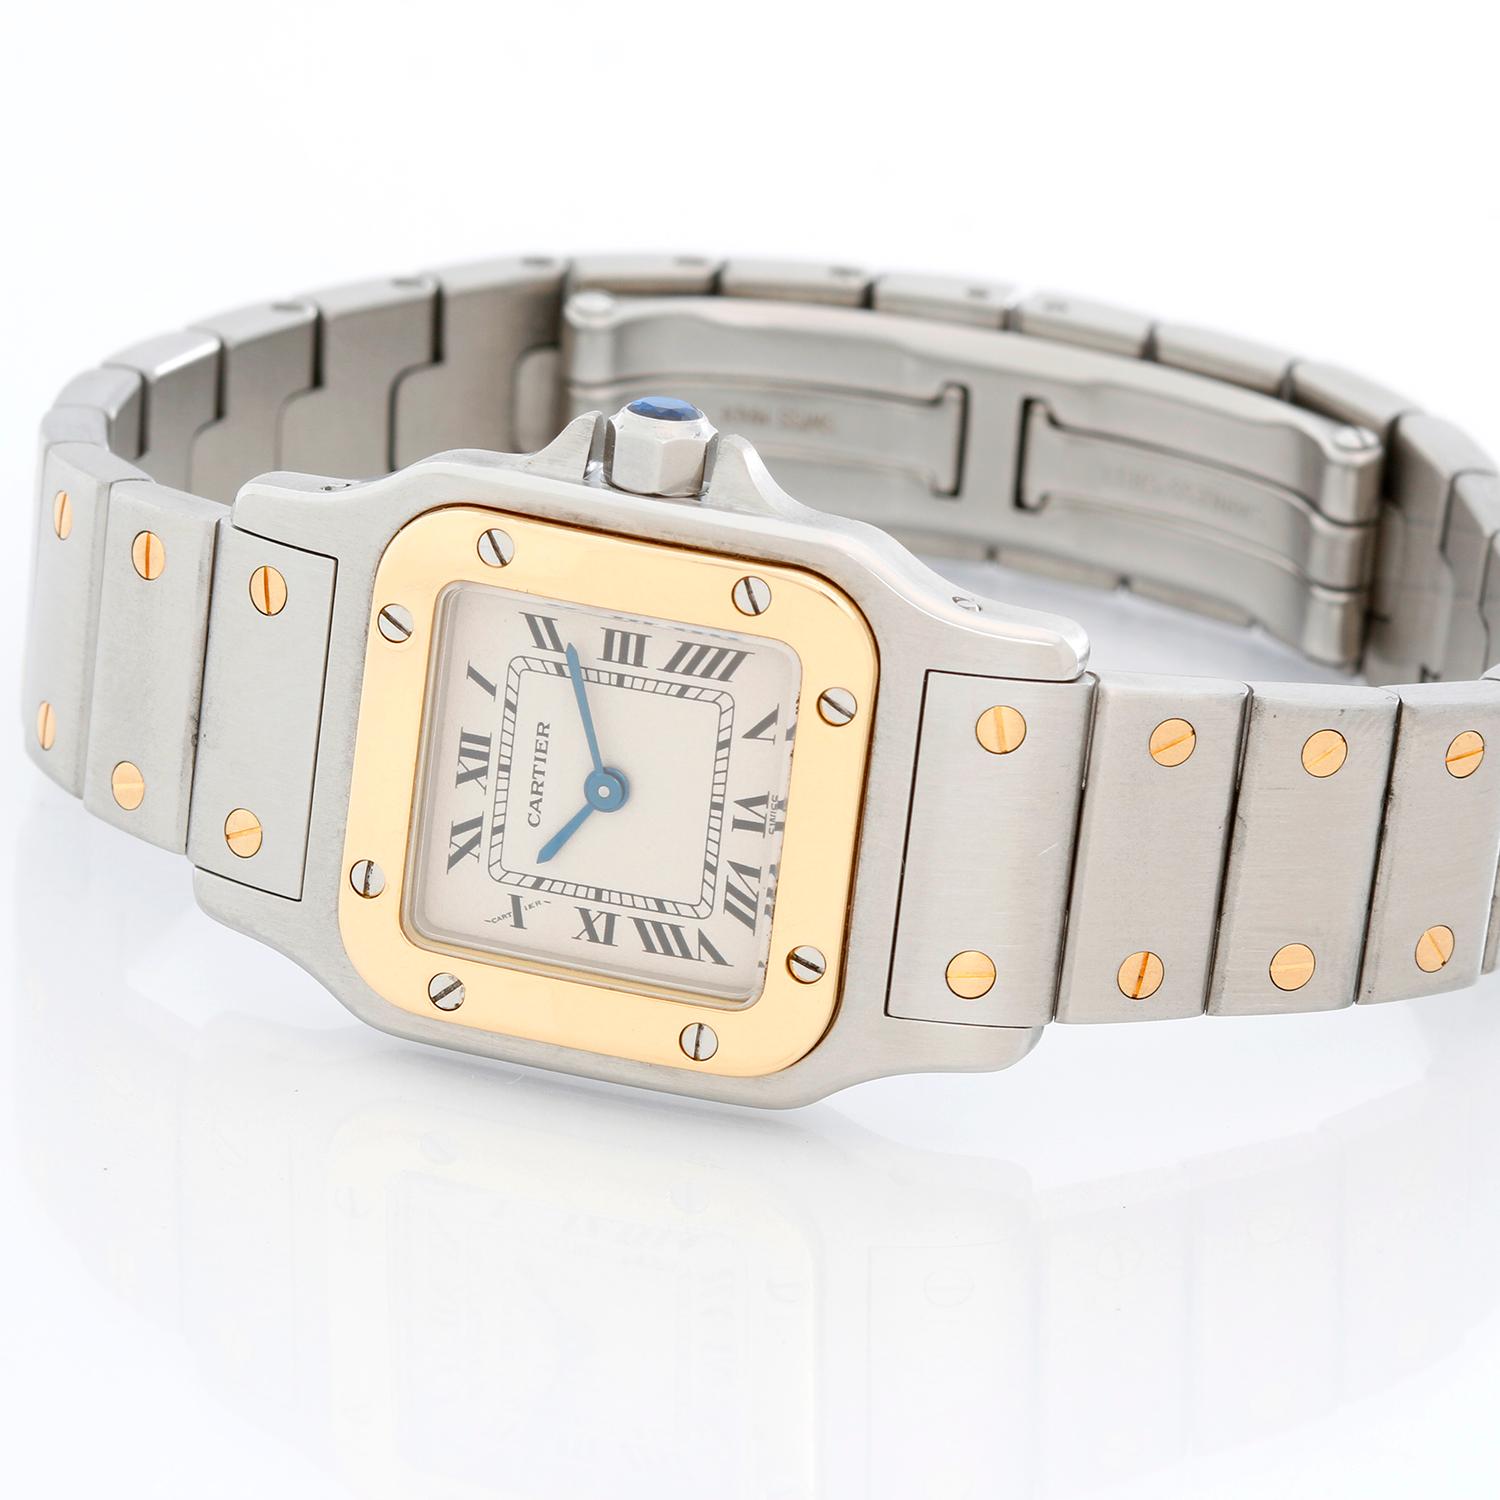 Cartier Santos Ladies 24mm Steel & Gold 2-Tone Automatic Watch - Quartz. Stainless steel case with 18k yellow gold bezel (24mm x 34mm ). Stainless steel case with 18k yellow gold bezel (24mm x 34mm ). Stainless steel bracelet with gold accents (will